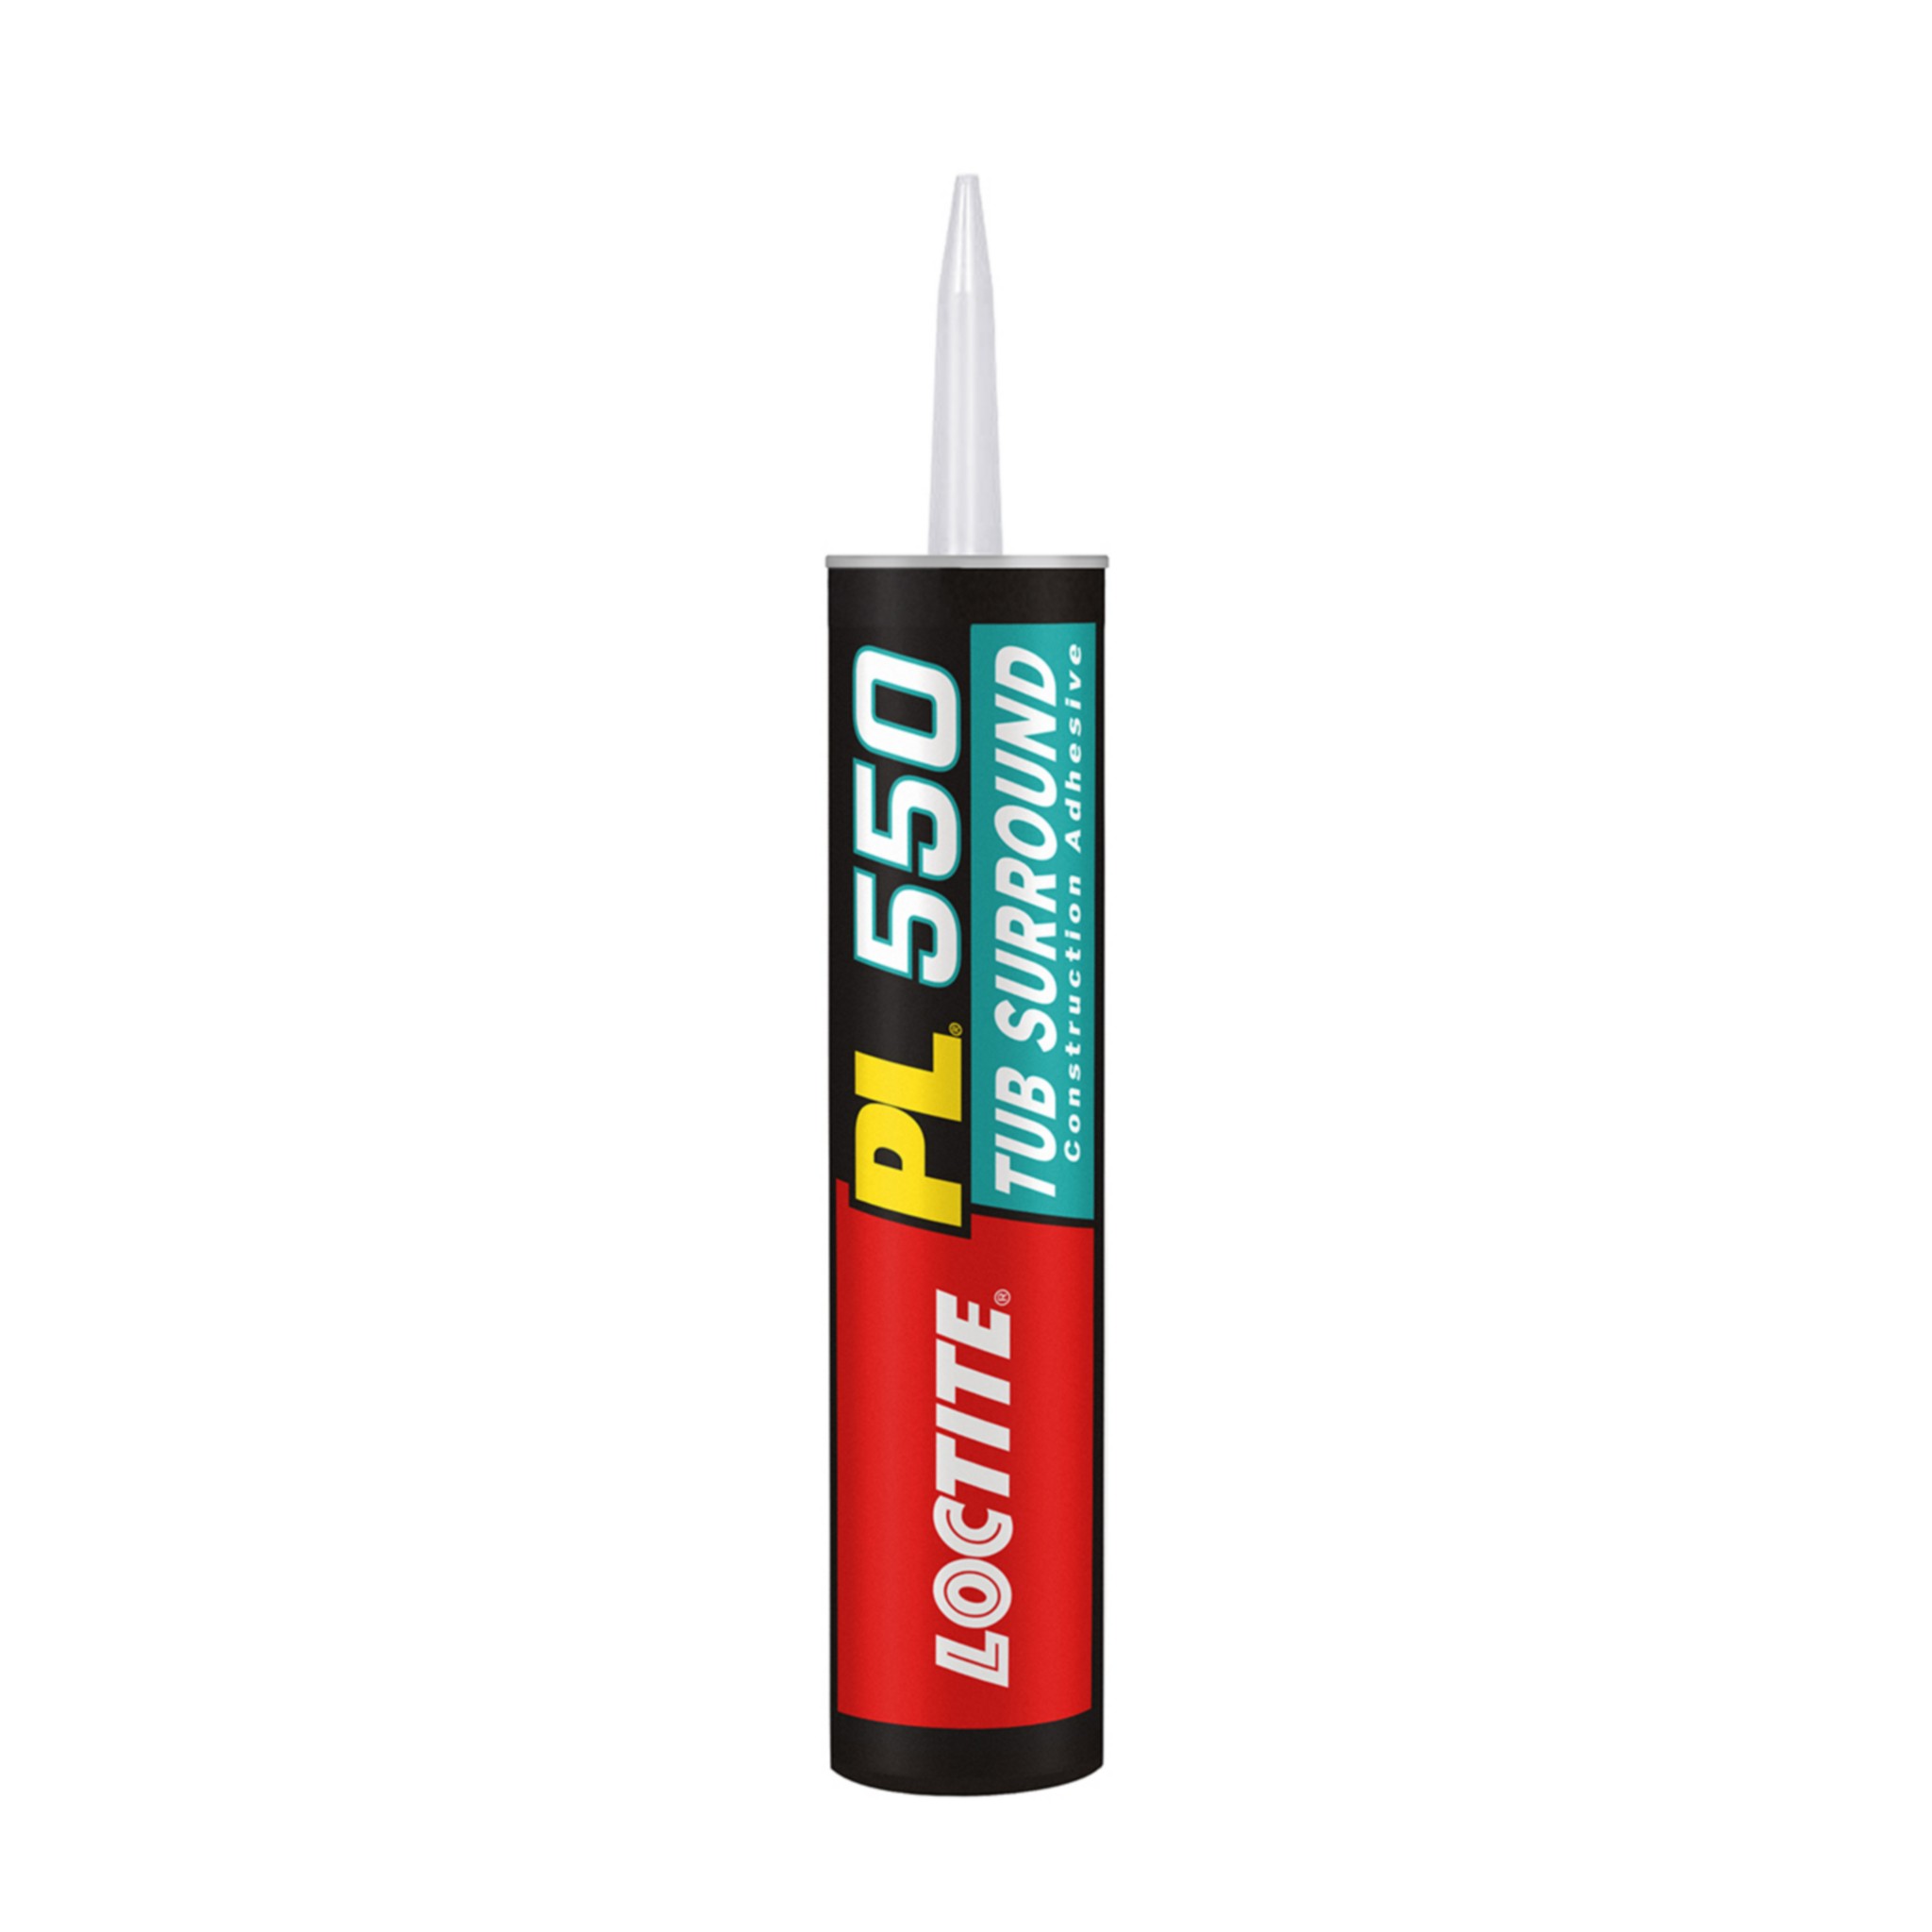 Loctite Pl 550 Tub Surround Adhesive, What Kind Of Adhesive For Tub Surround